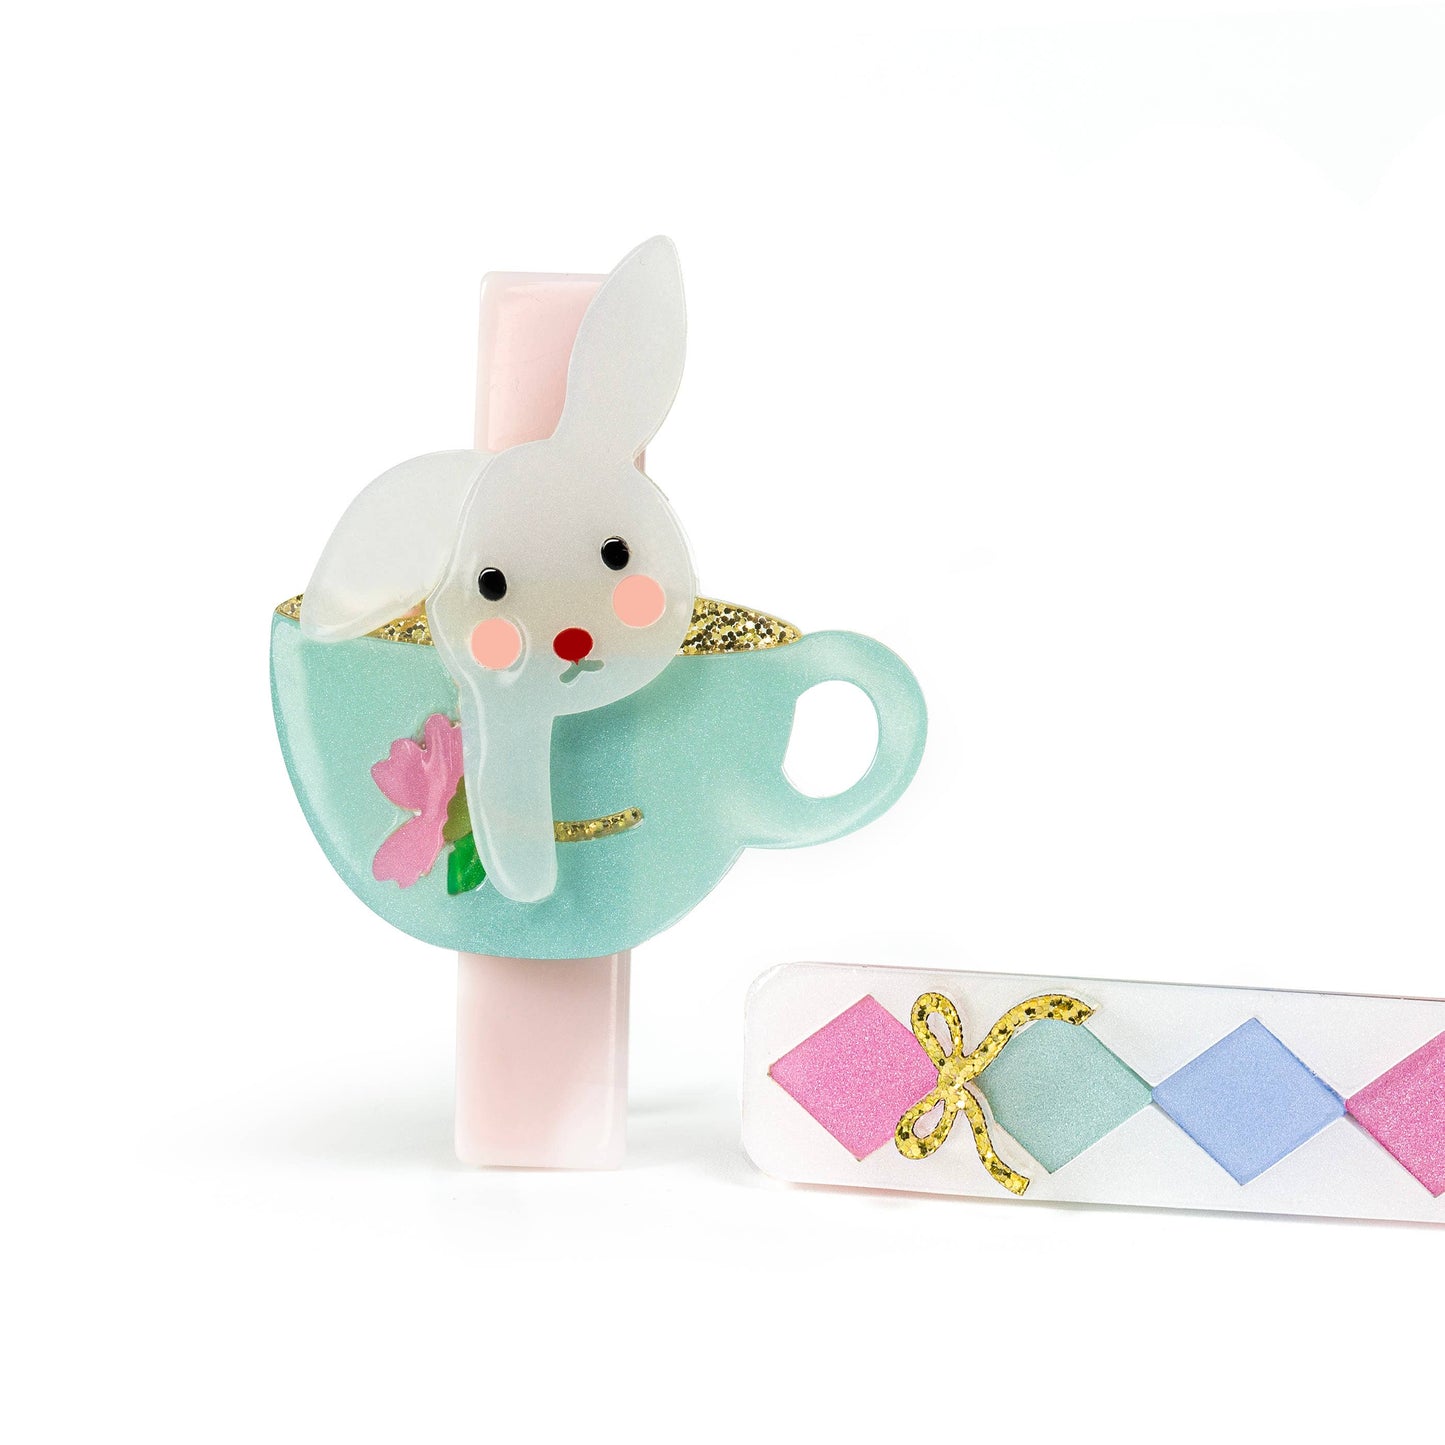 Lilies & Roses NY -Bunny In a Teacup Hair Clips